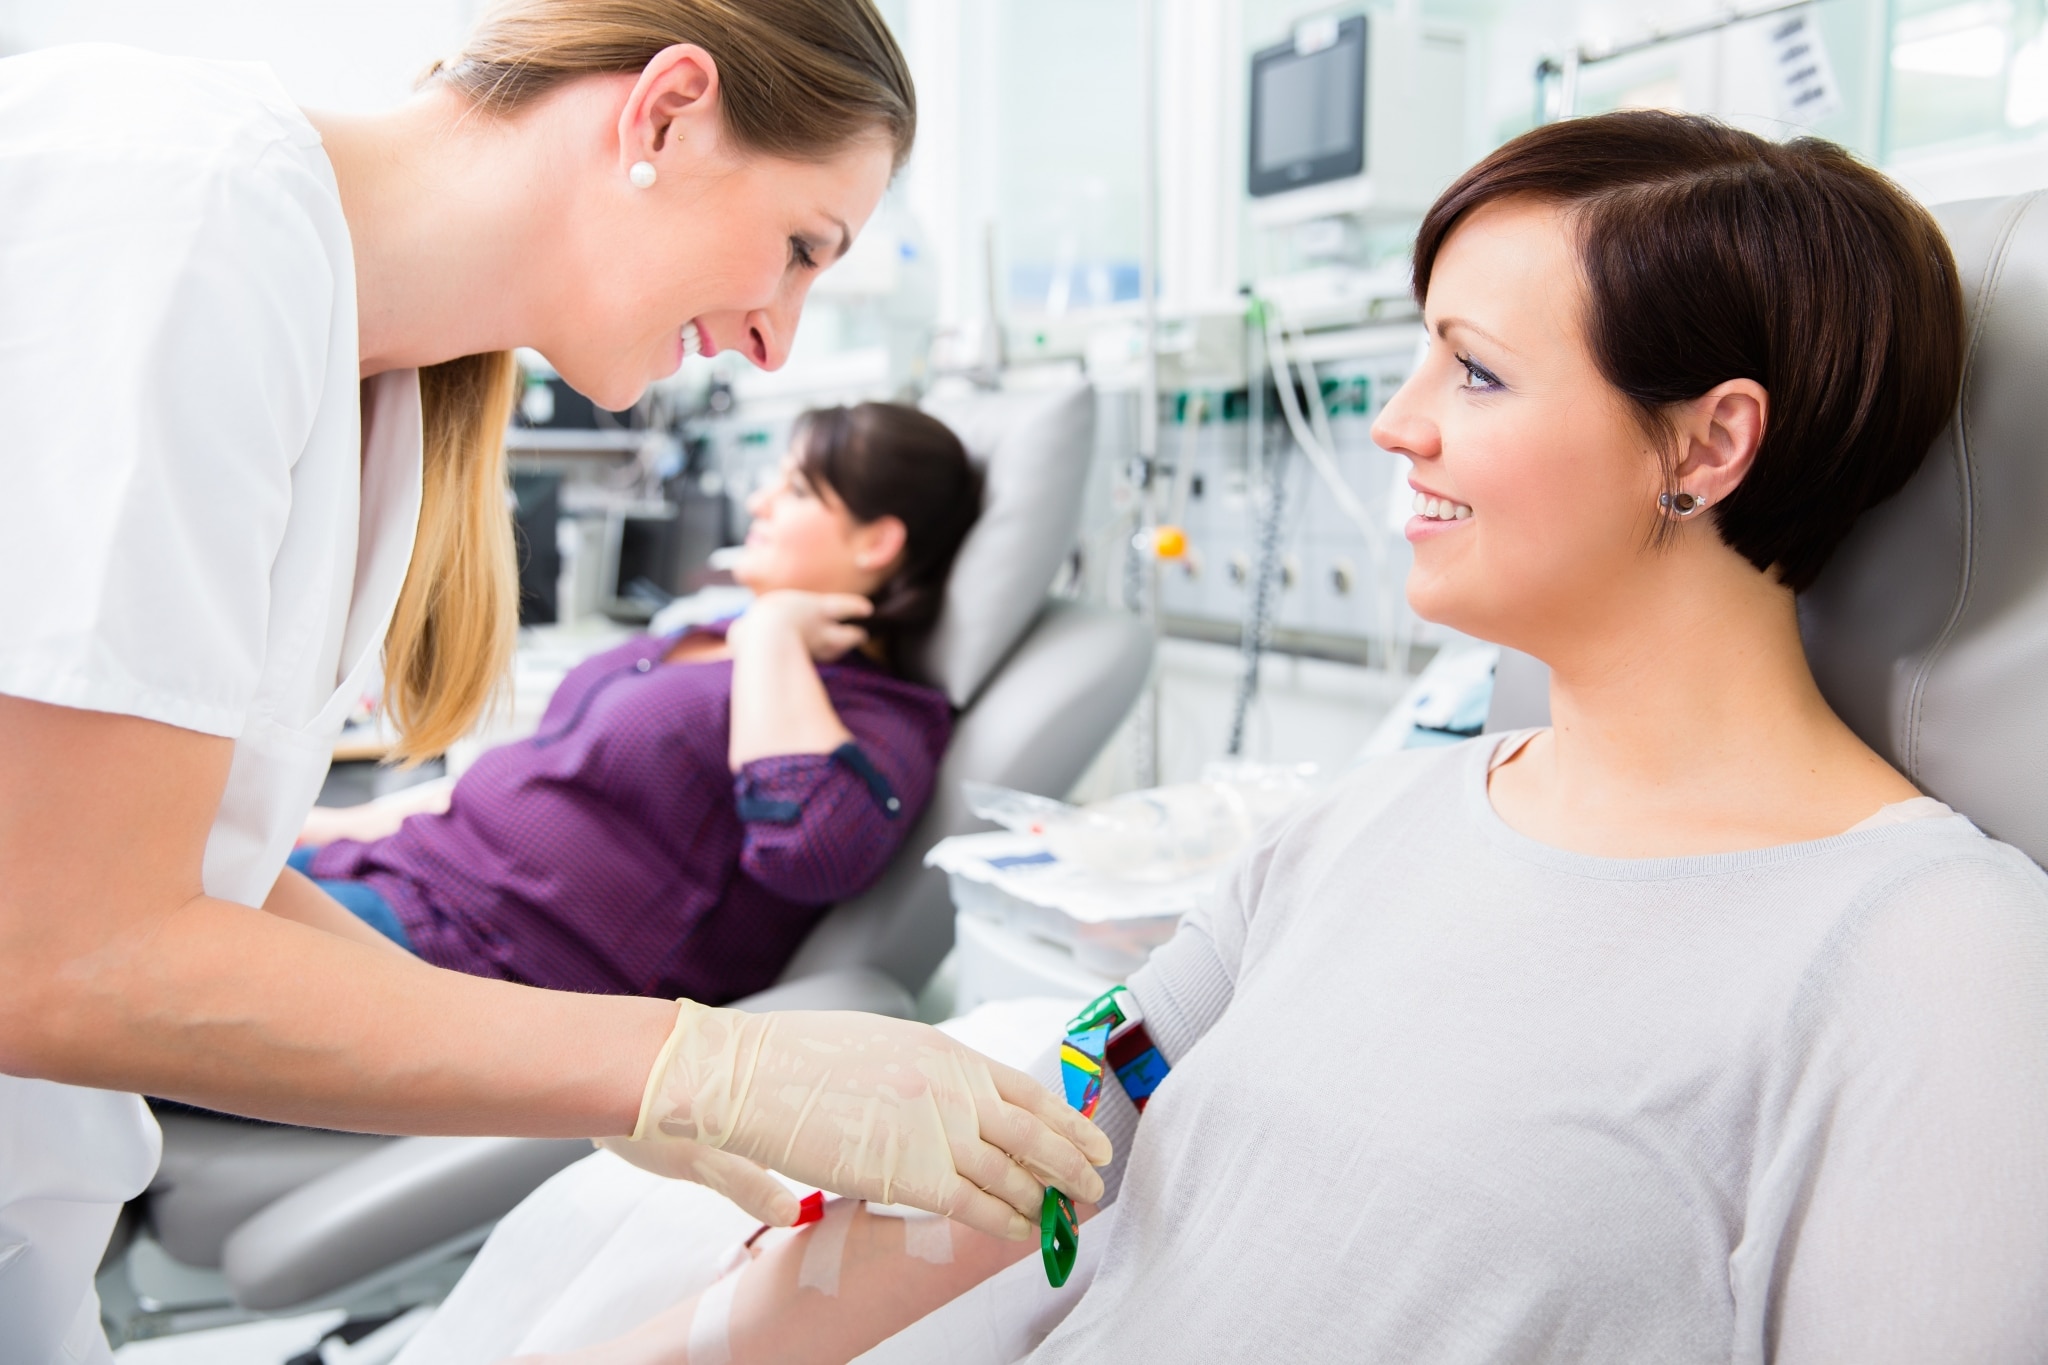 Phlebotomy Technician taking blood from a patient